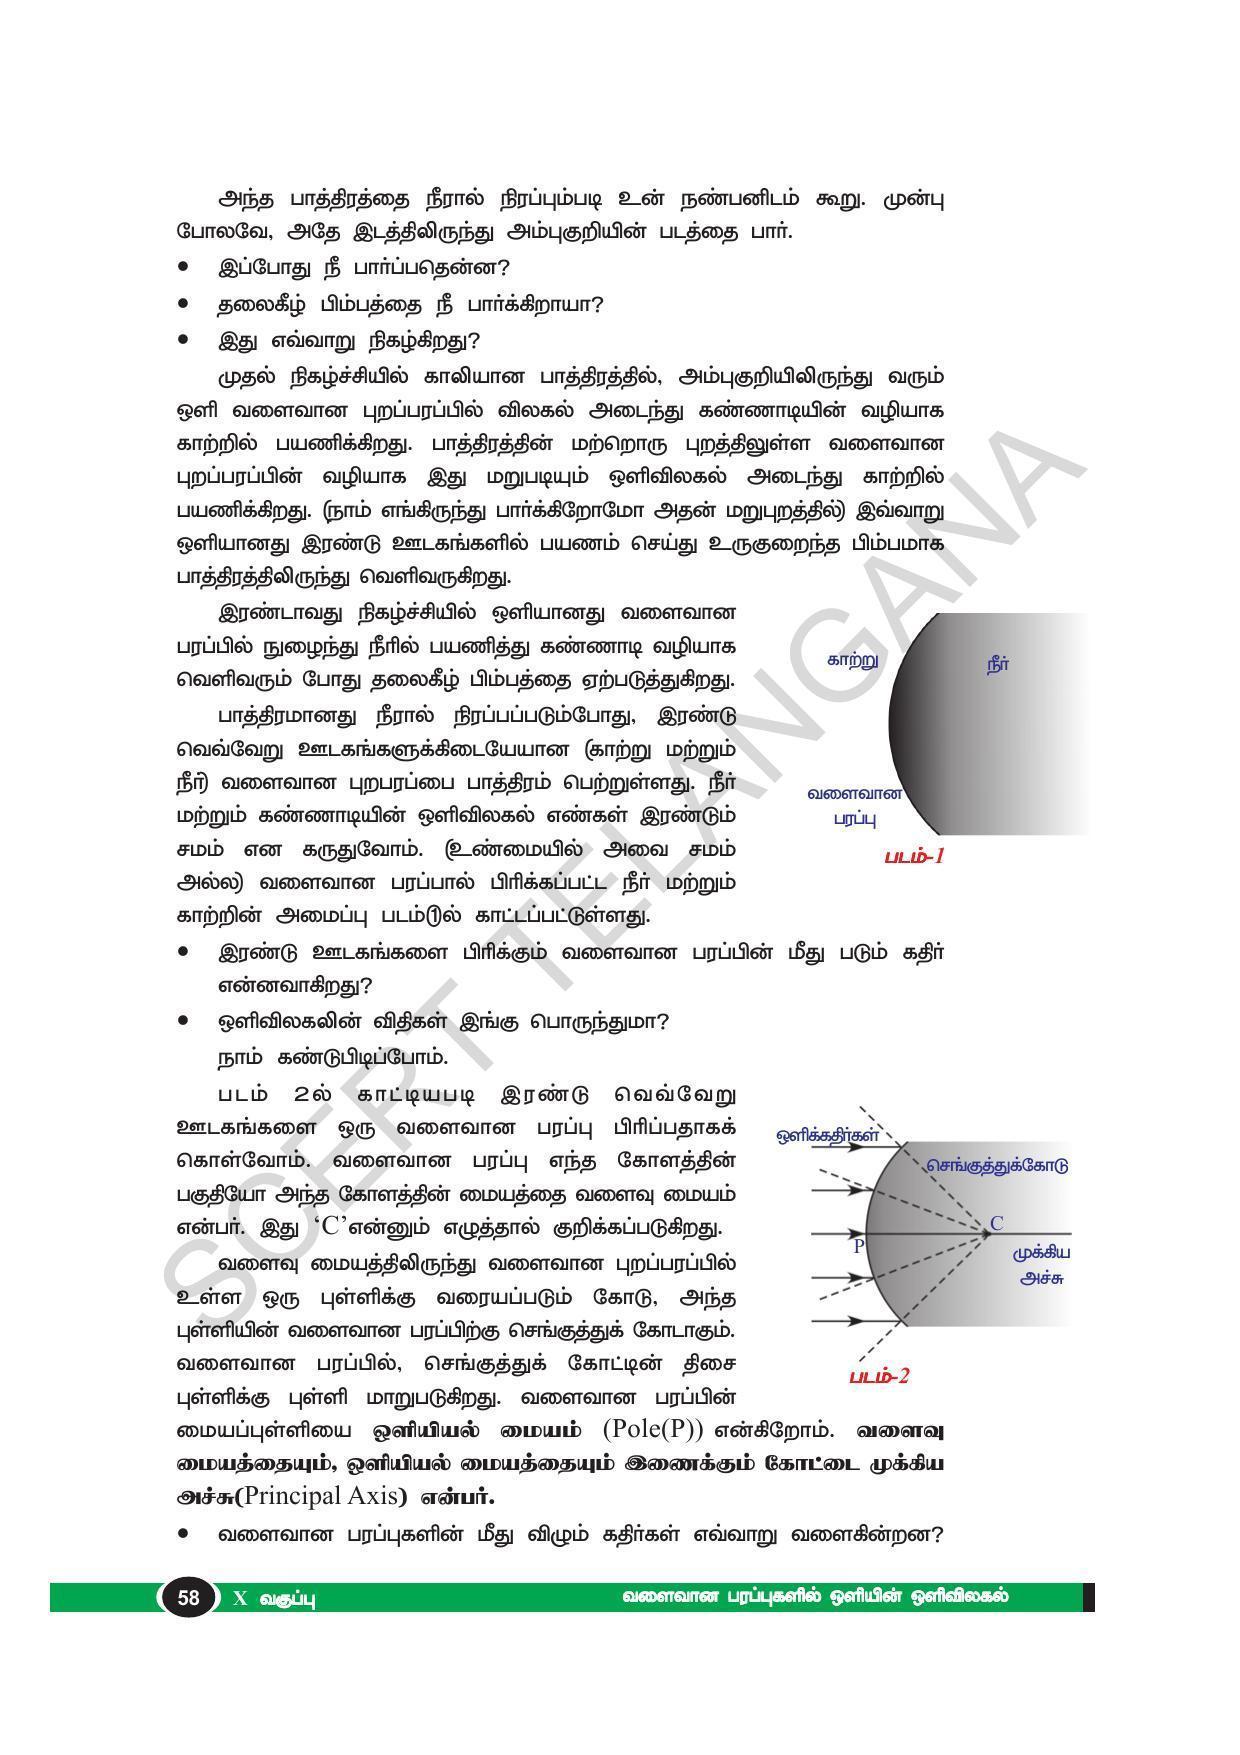 TS SCERT Class 10 Physical Science(Tamil Medium) Text Book - Page 70